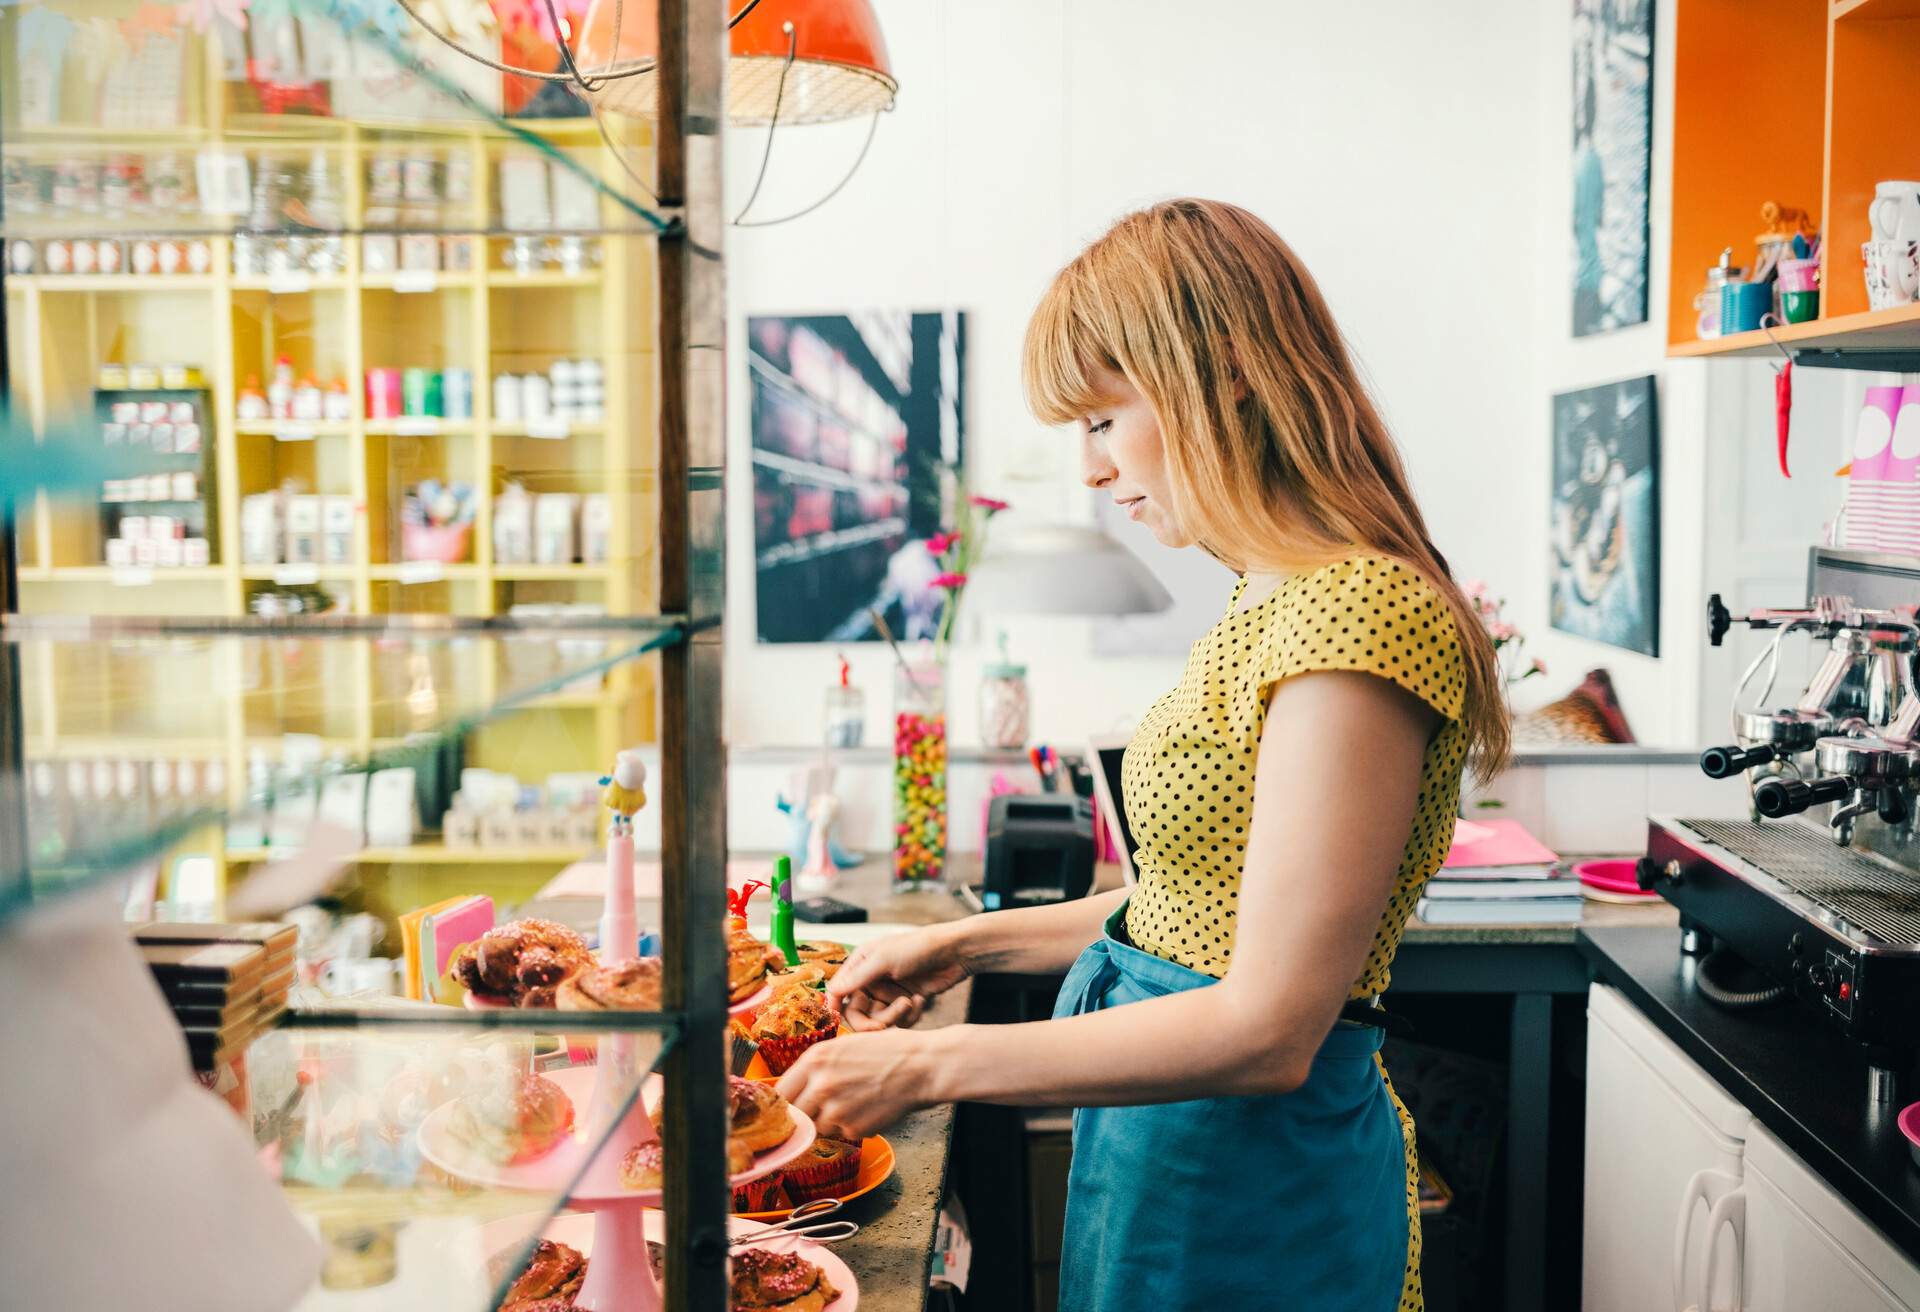 A woman in a yellow shirt prepares an assortment of pastries on a store counter.